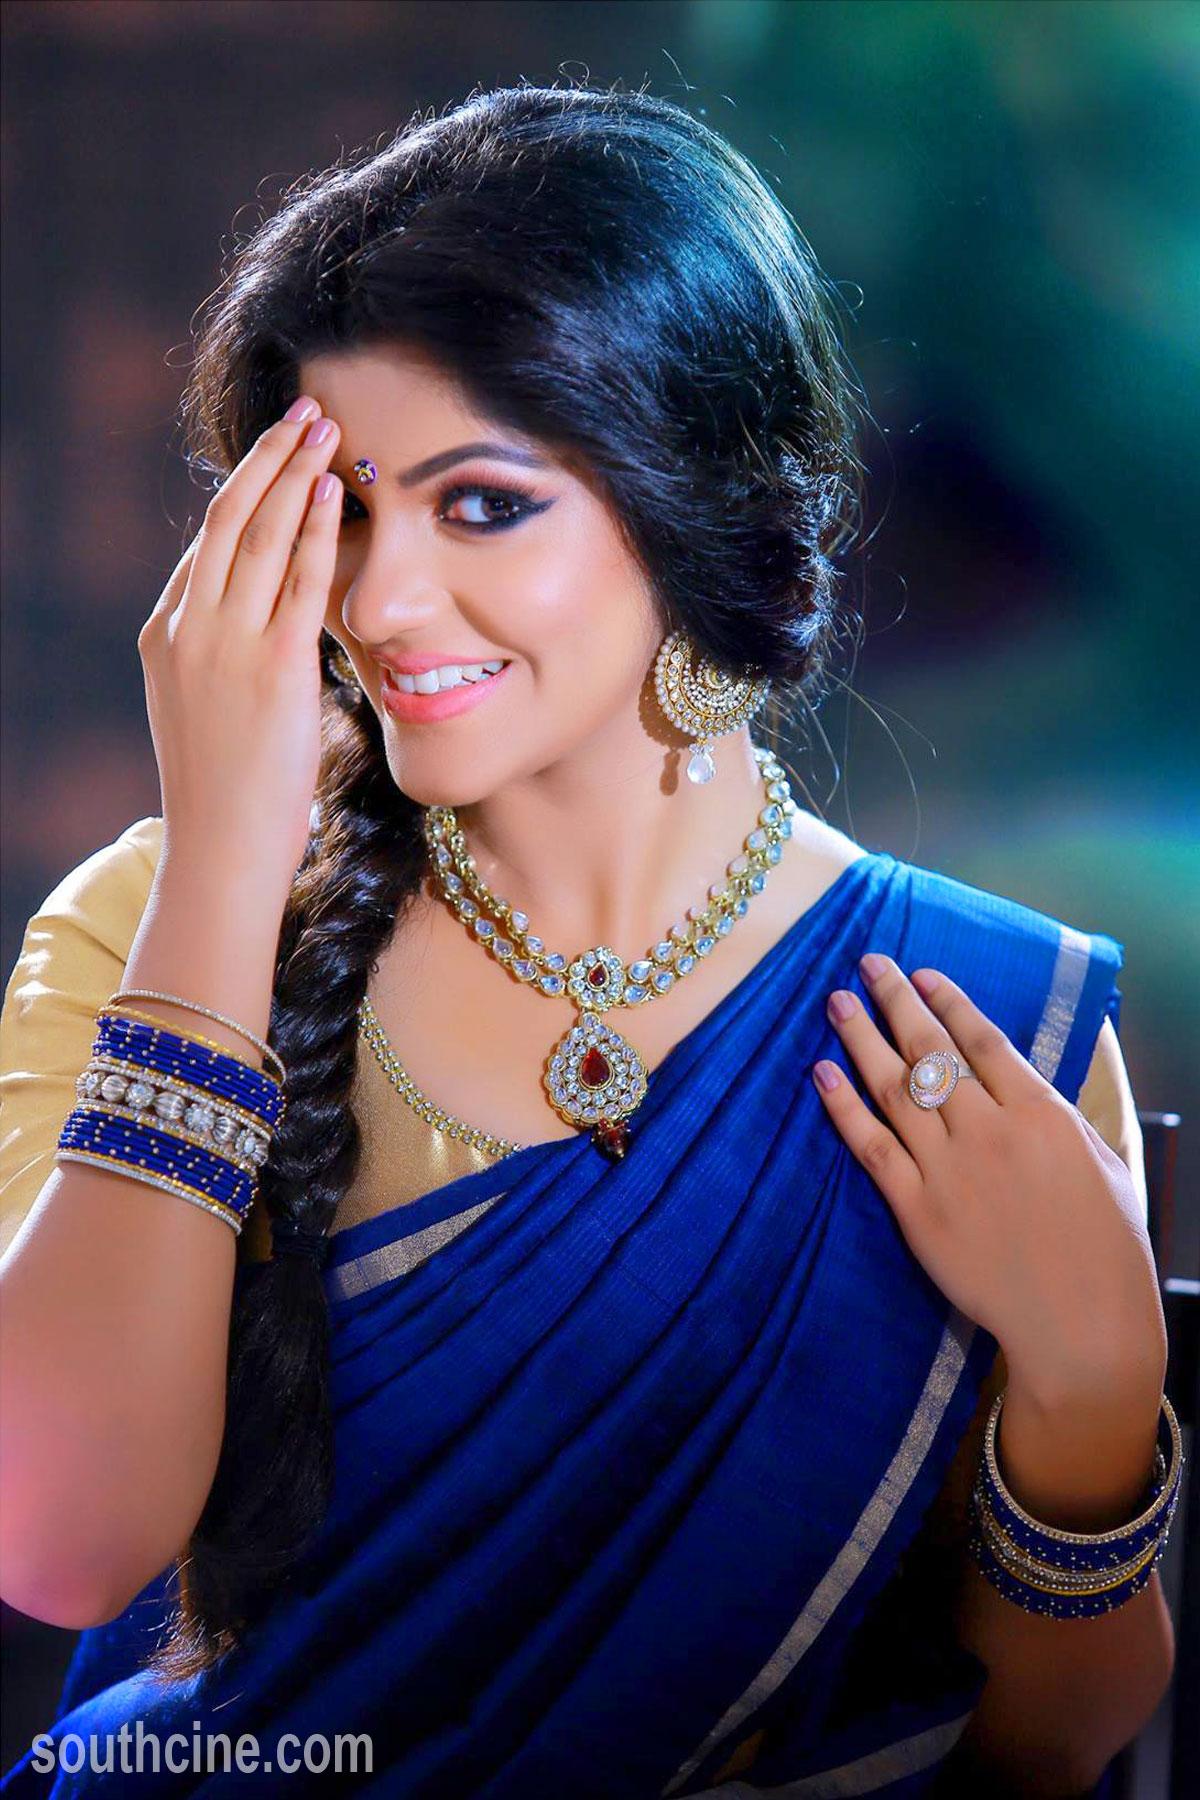 Hd Cute Actress Wallpapers For Mobile